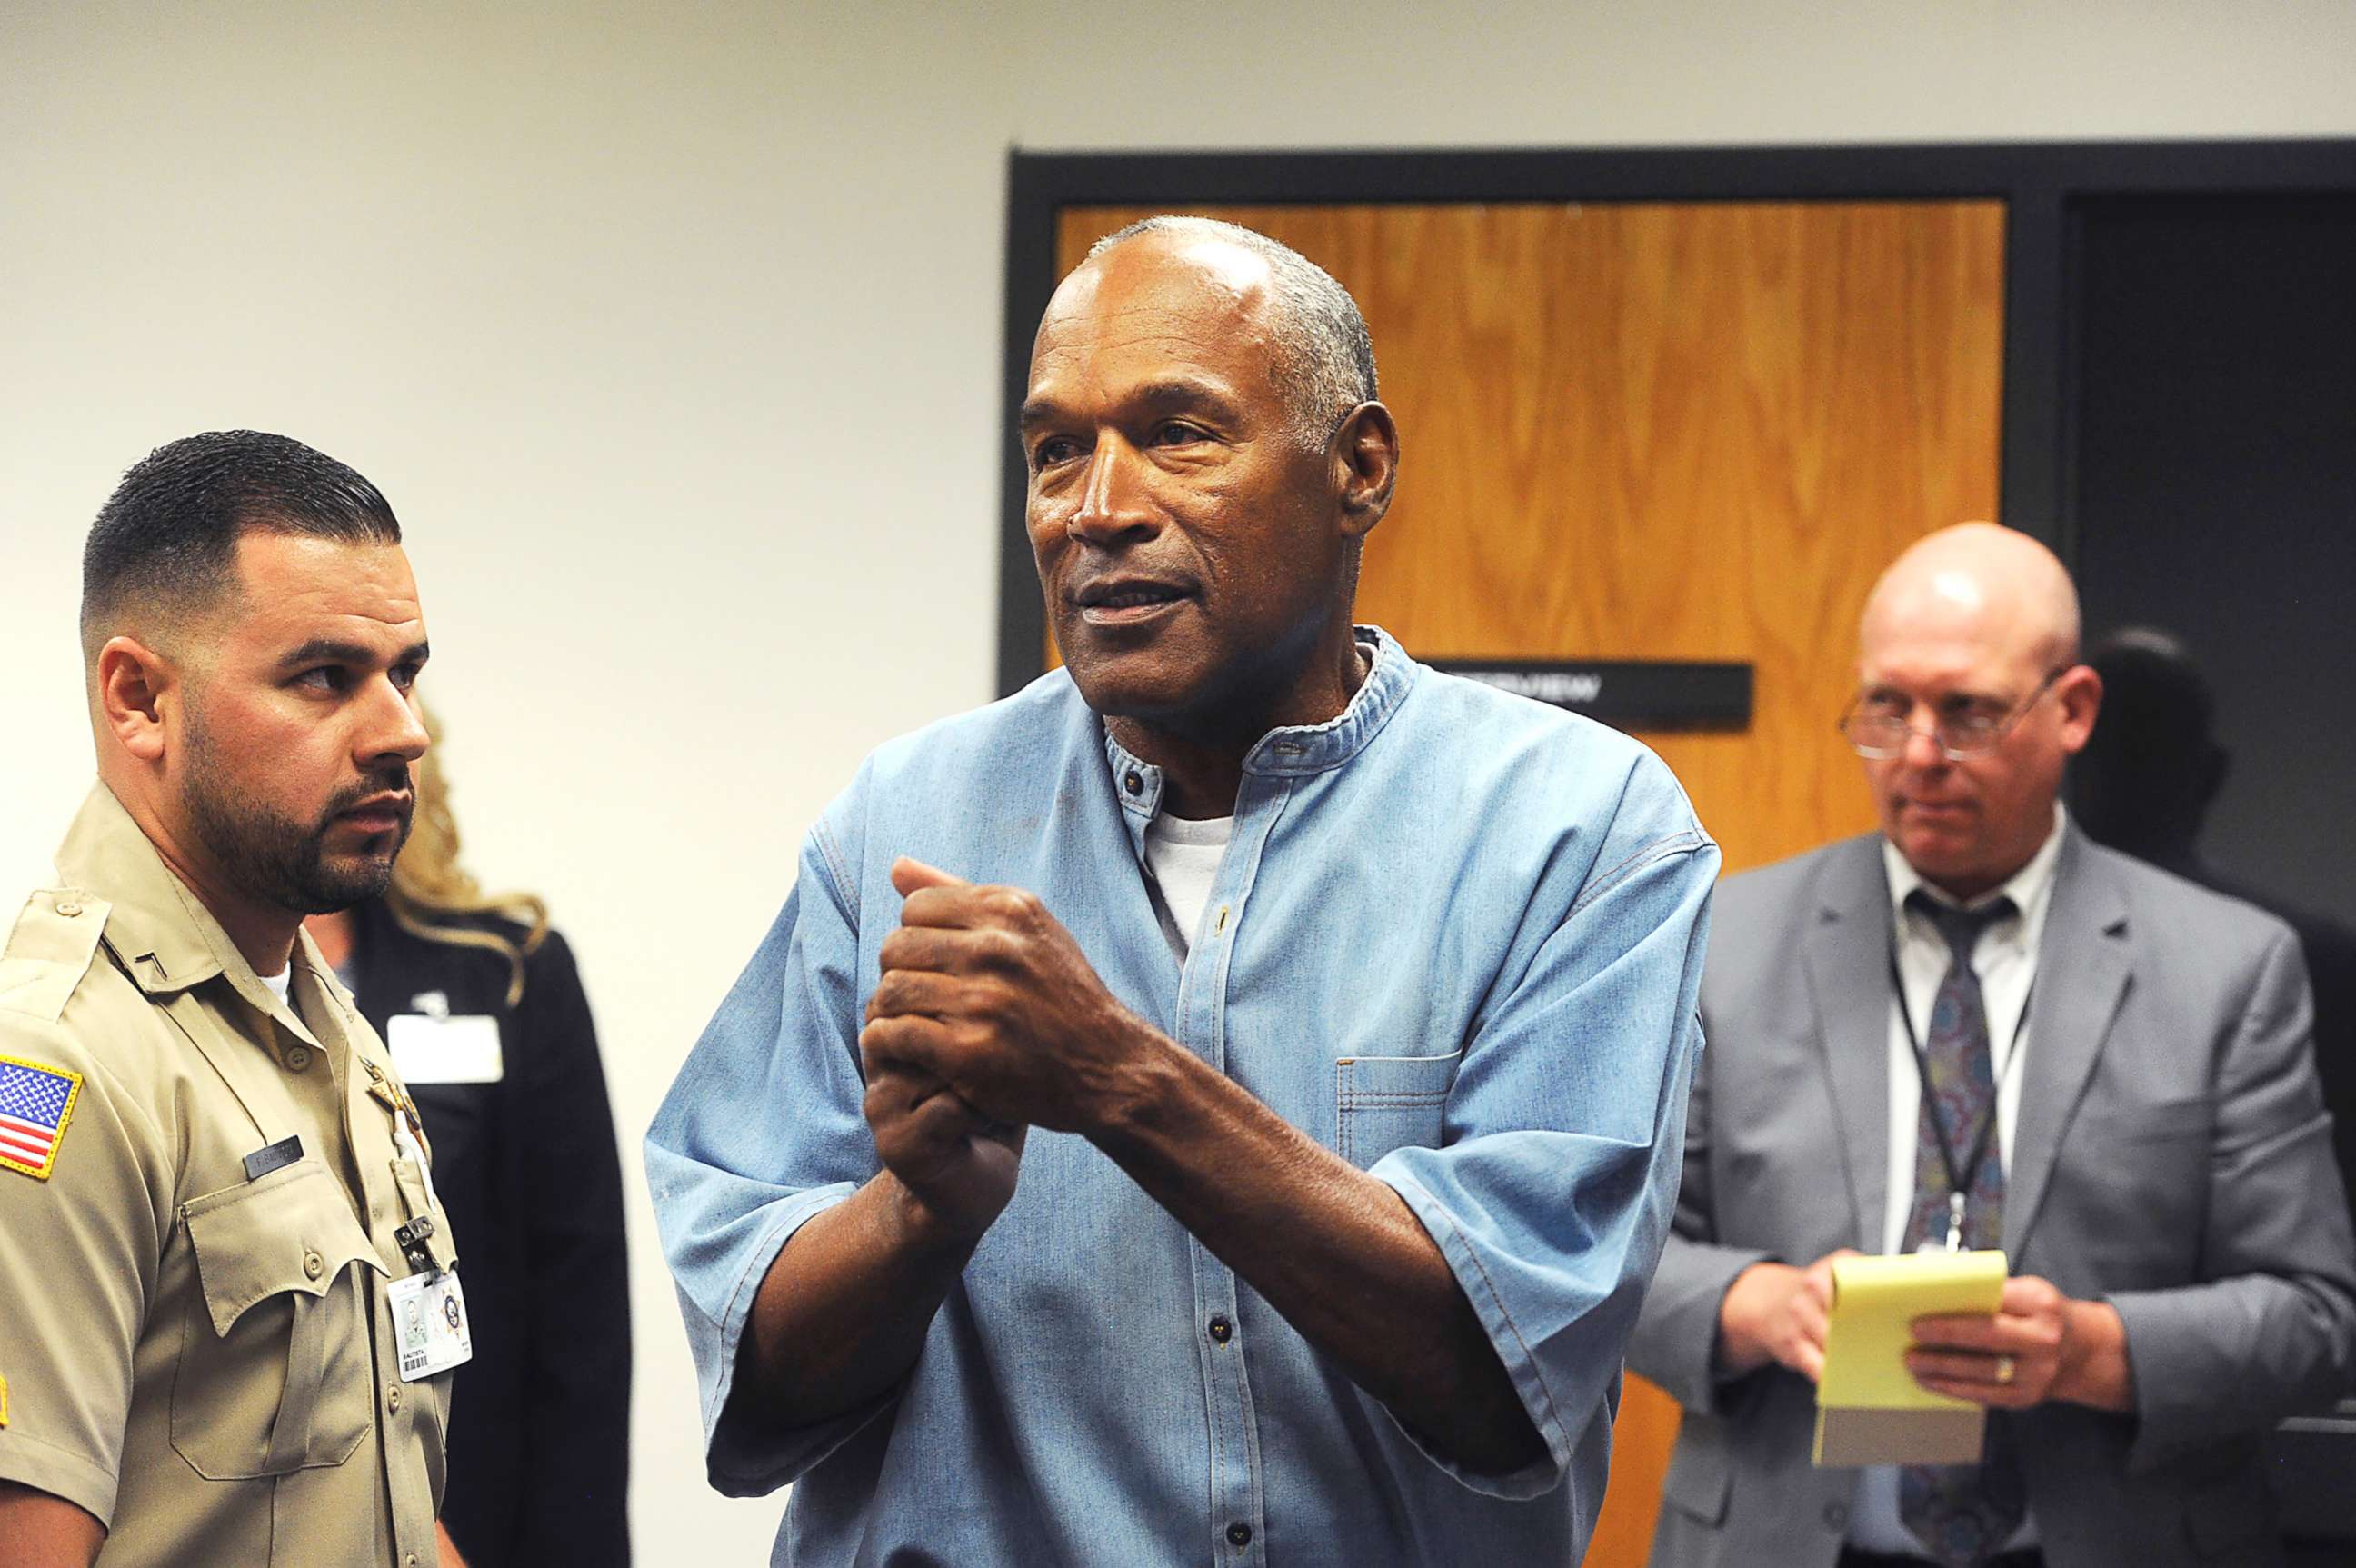 PHOTO: O.J. Simpson reacts after learning he was granted parole at Lovelock Correctional Center in Lovelock, Nev., July 20, 2017.
